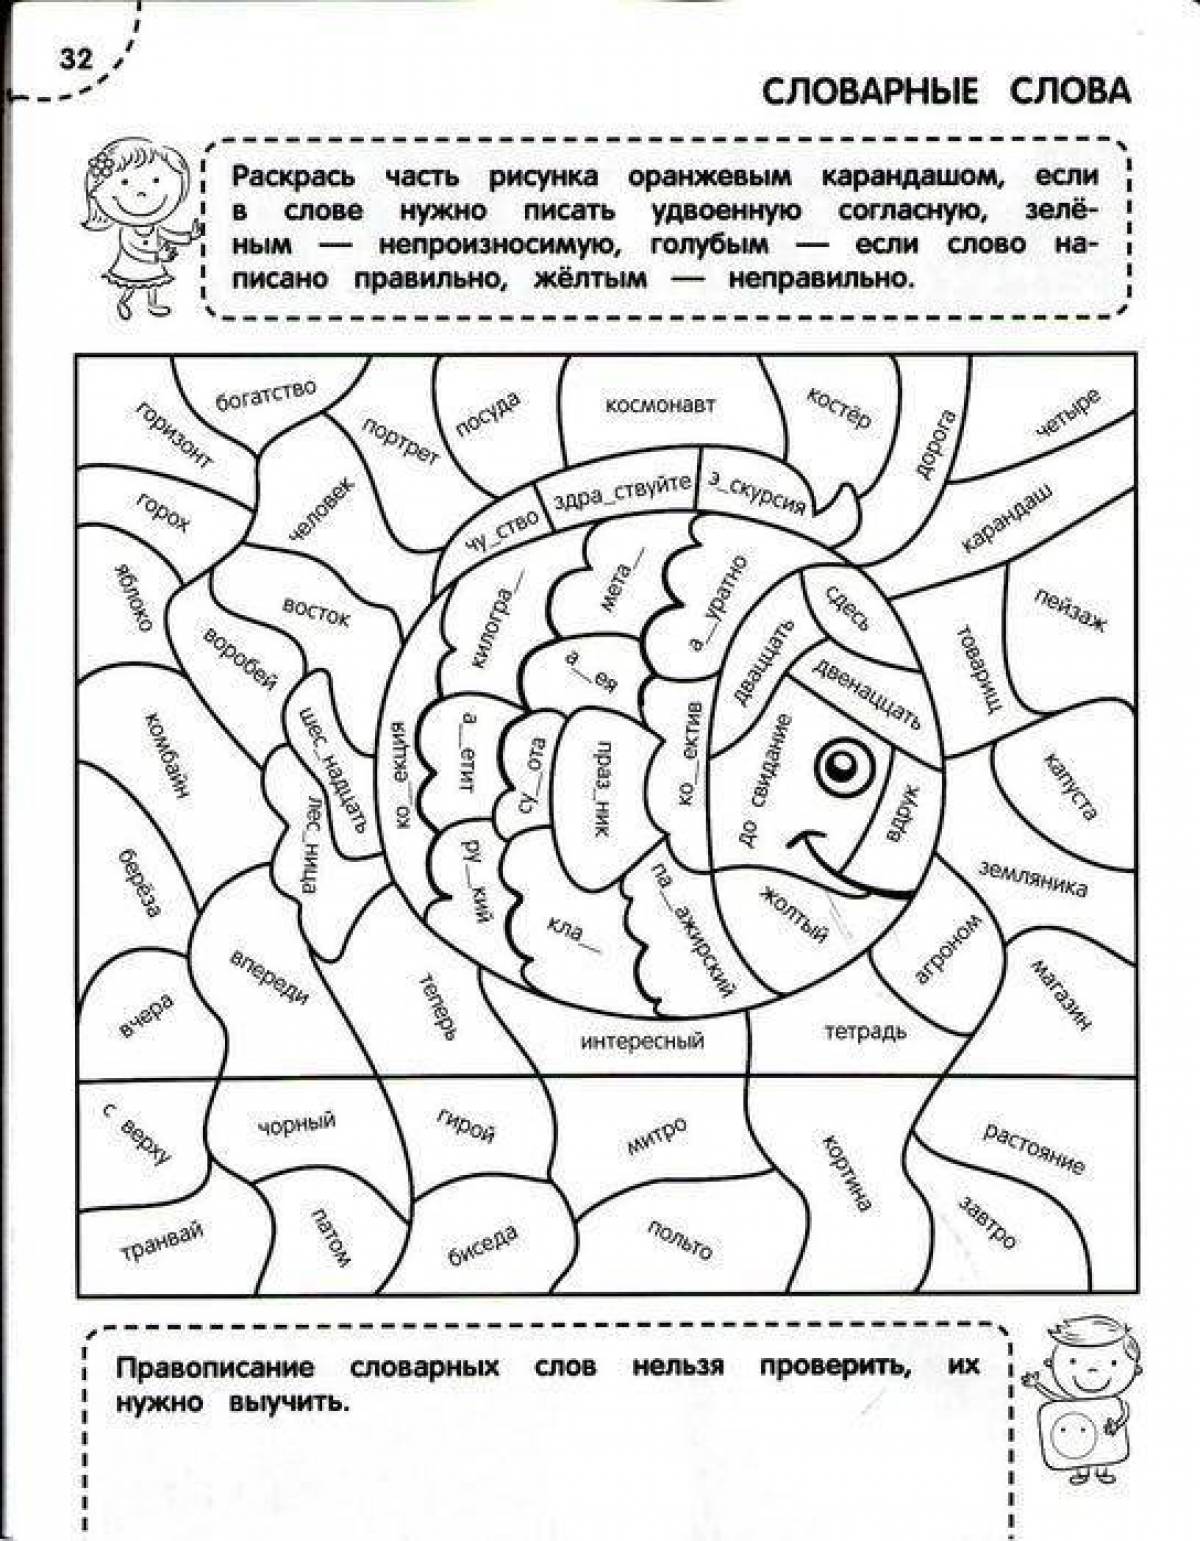 Intriguing coloring book in Russian, Grade 2